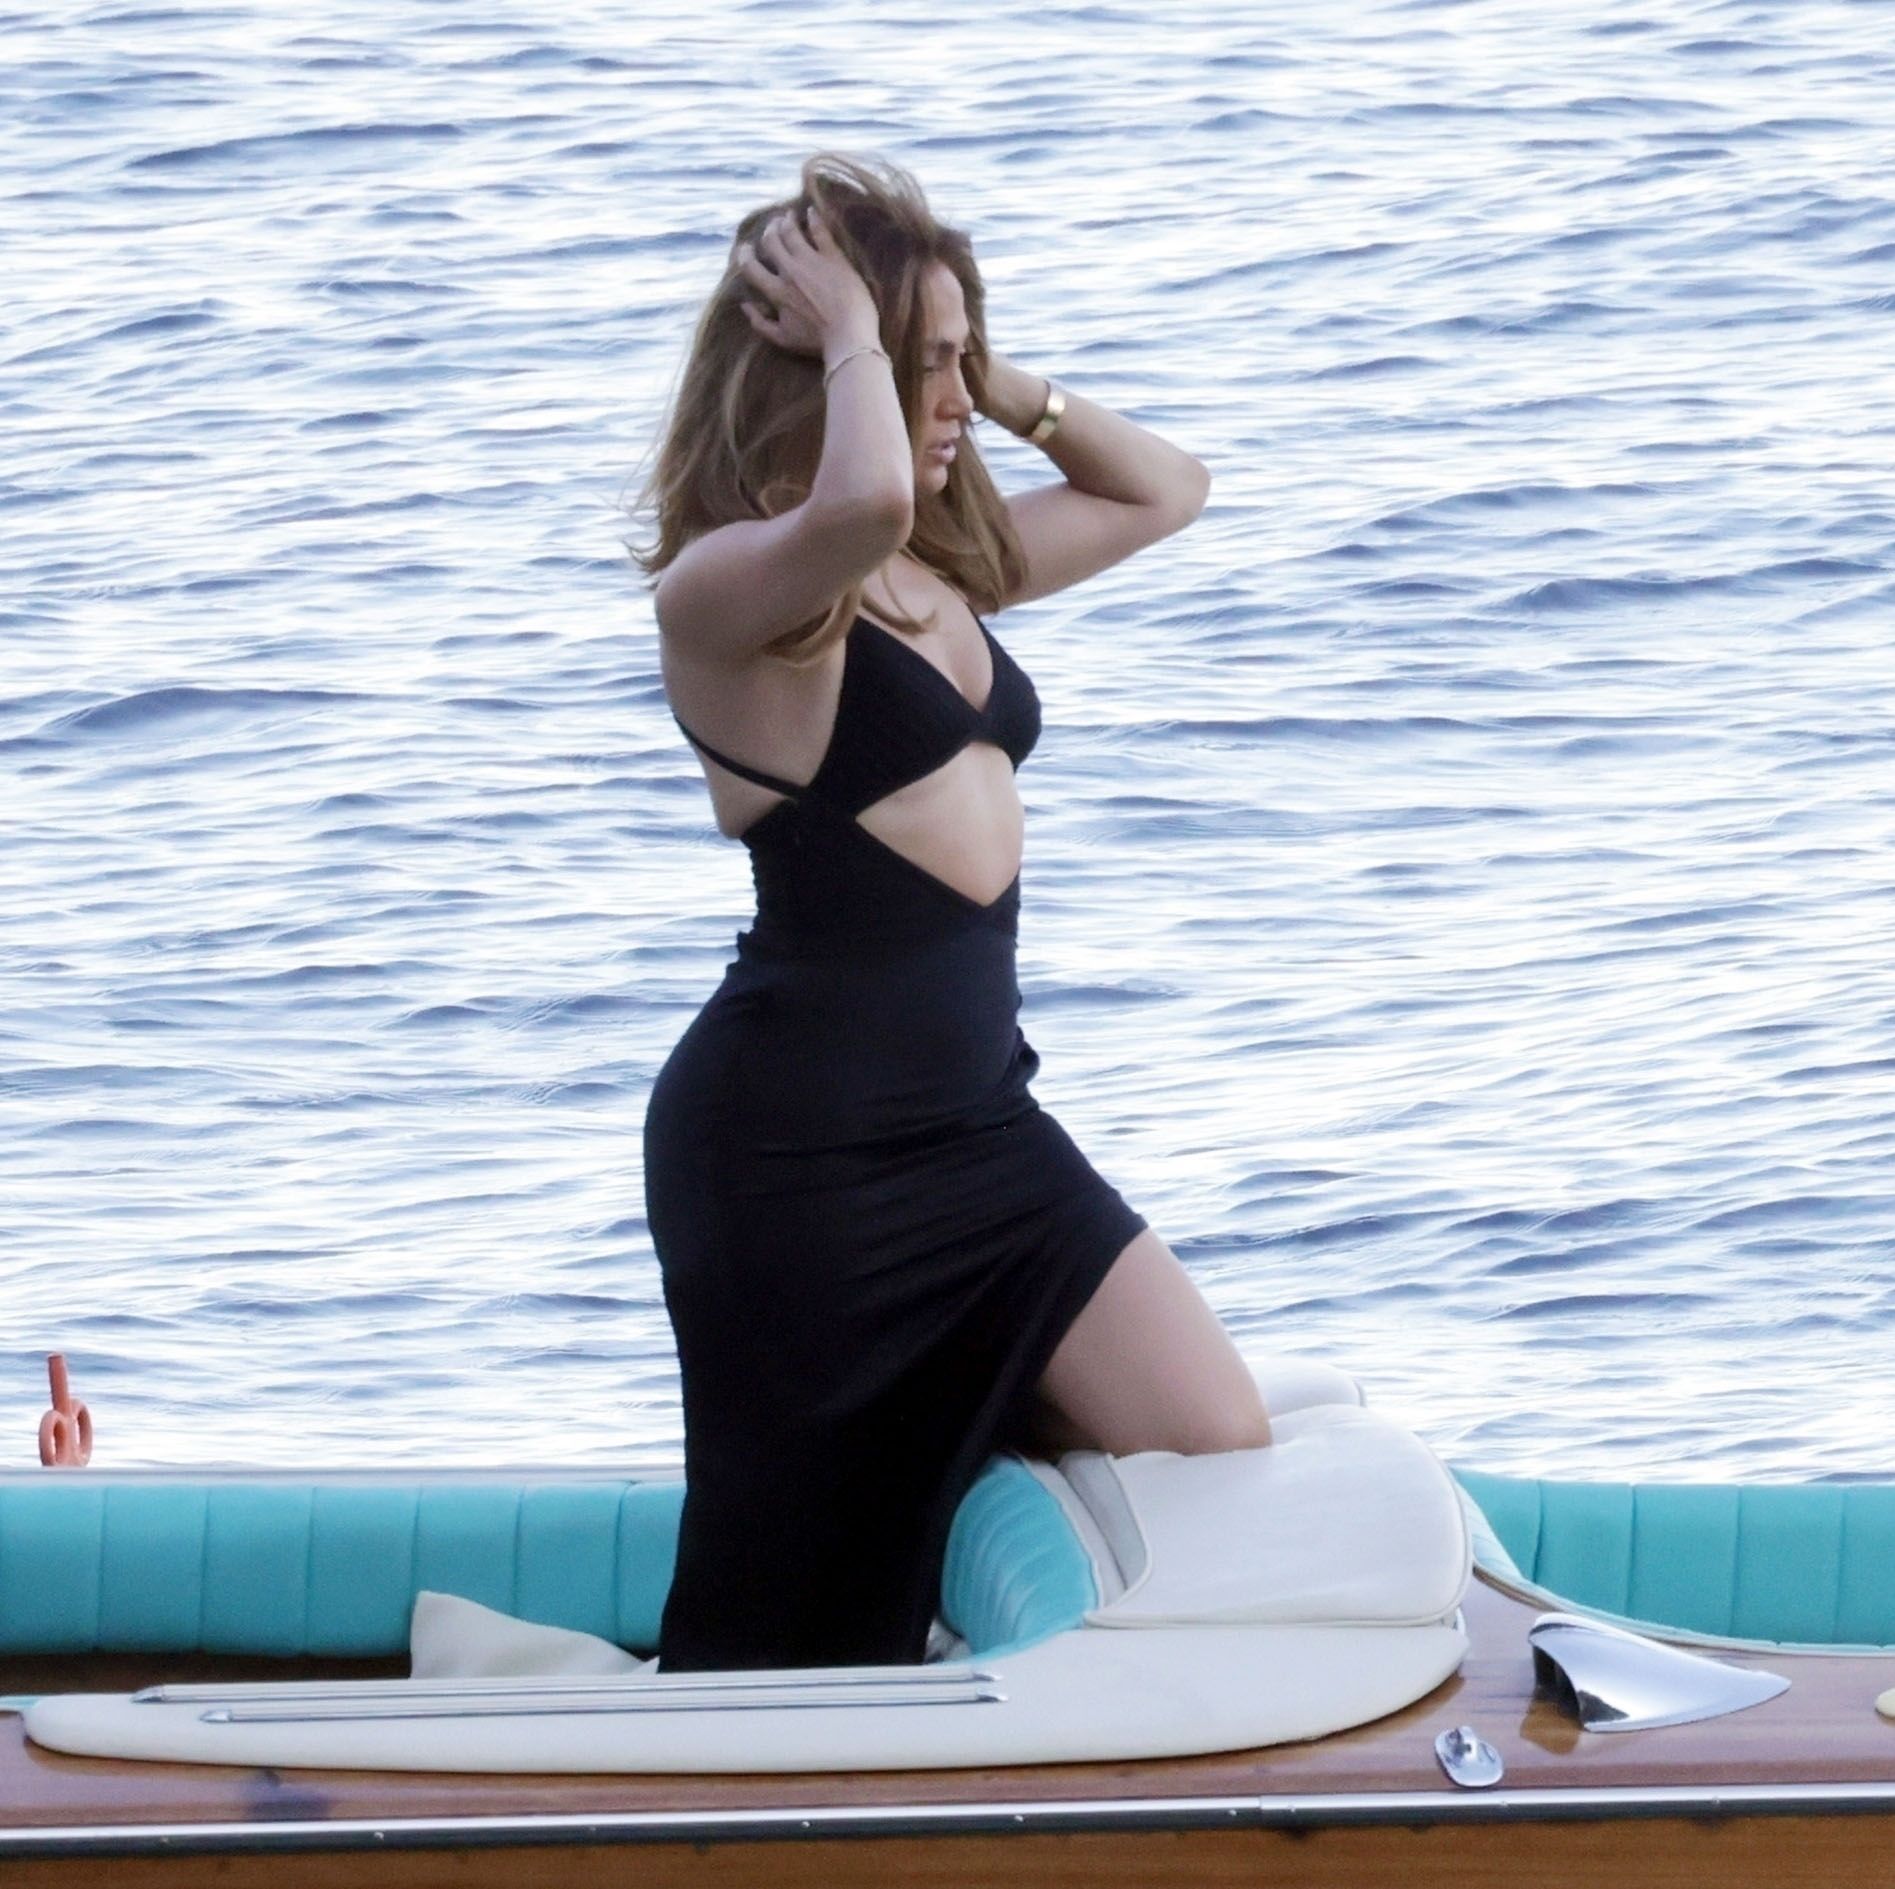 Jennifer Lopez Sipping a Drink on a Yacht in Italy Is the Epitome of Summer Goals